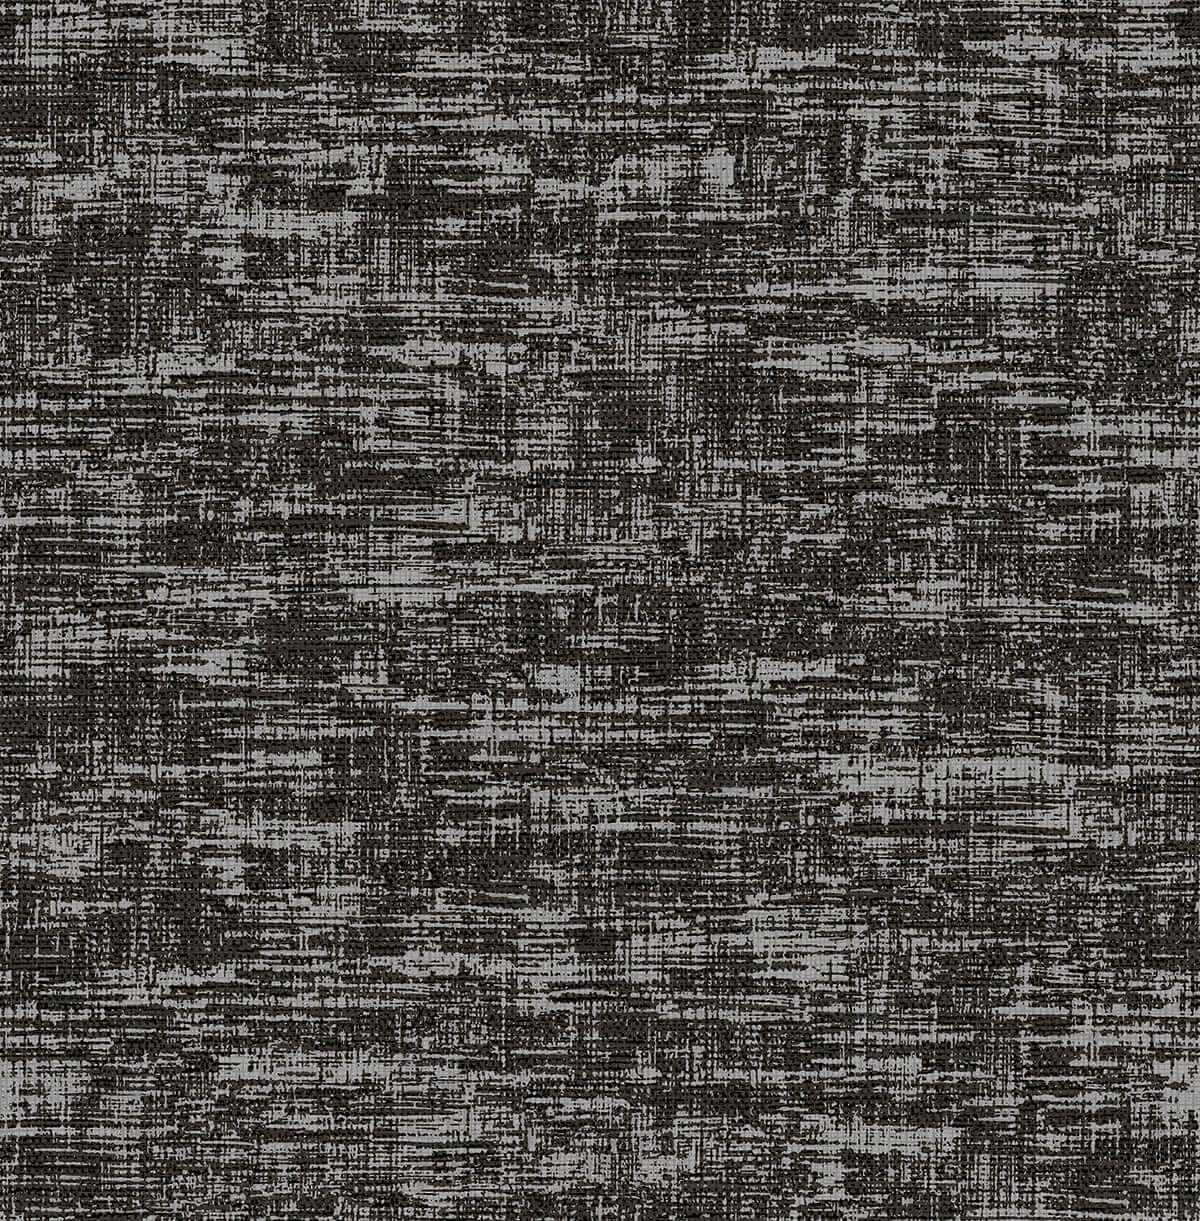 Stacy Garcia Home Interference Peel & Stick Wallpaper - Ash Grey